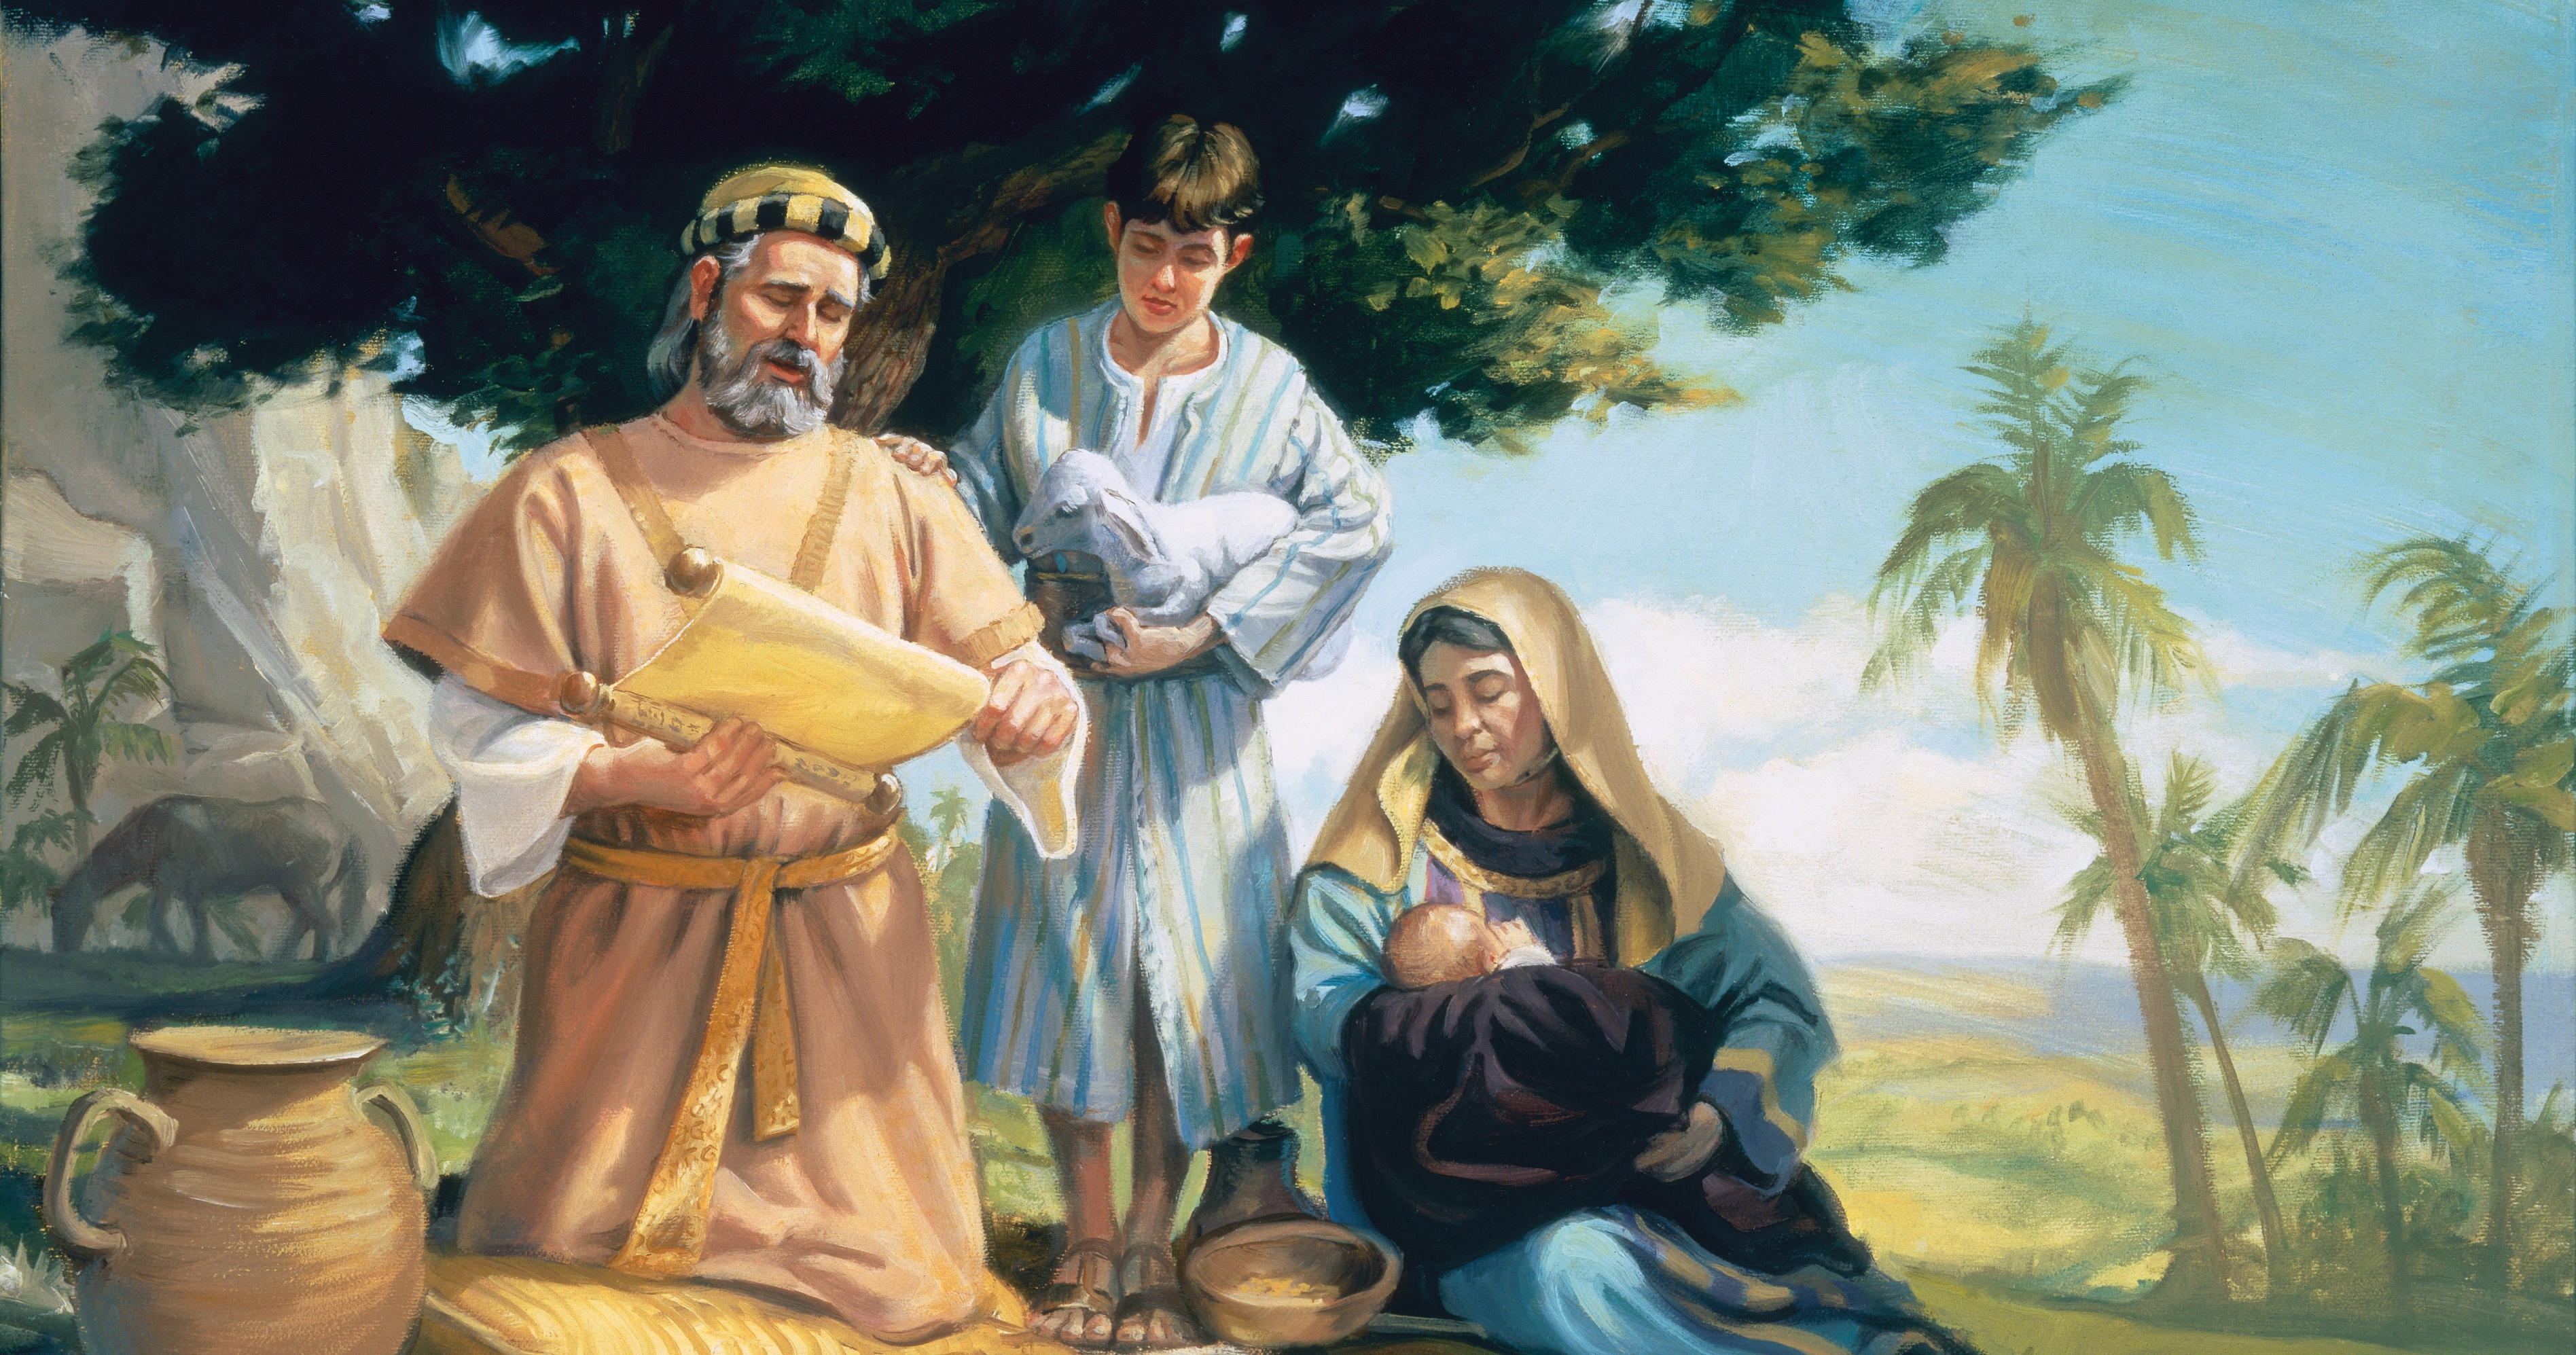 The Book of Mormon prophet Enos depicted as a young boy. Enos is looking at his father and mother. Jacob, the father of Enos, is reading scriptures from a scroll. Enos' mother is holding an infant. The illustration depicts the teachings and influence of Jacob upon his son.